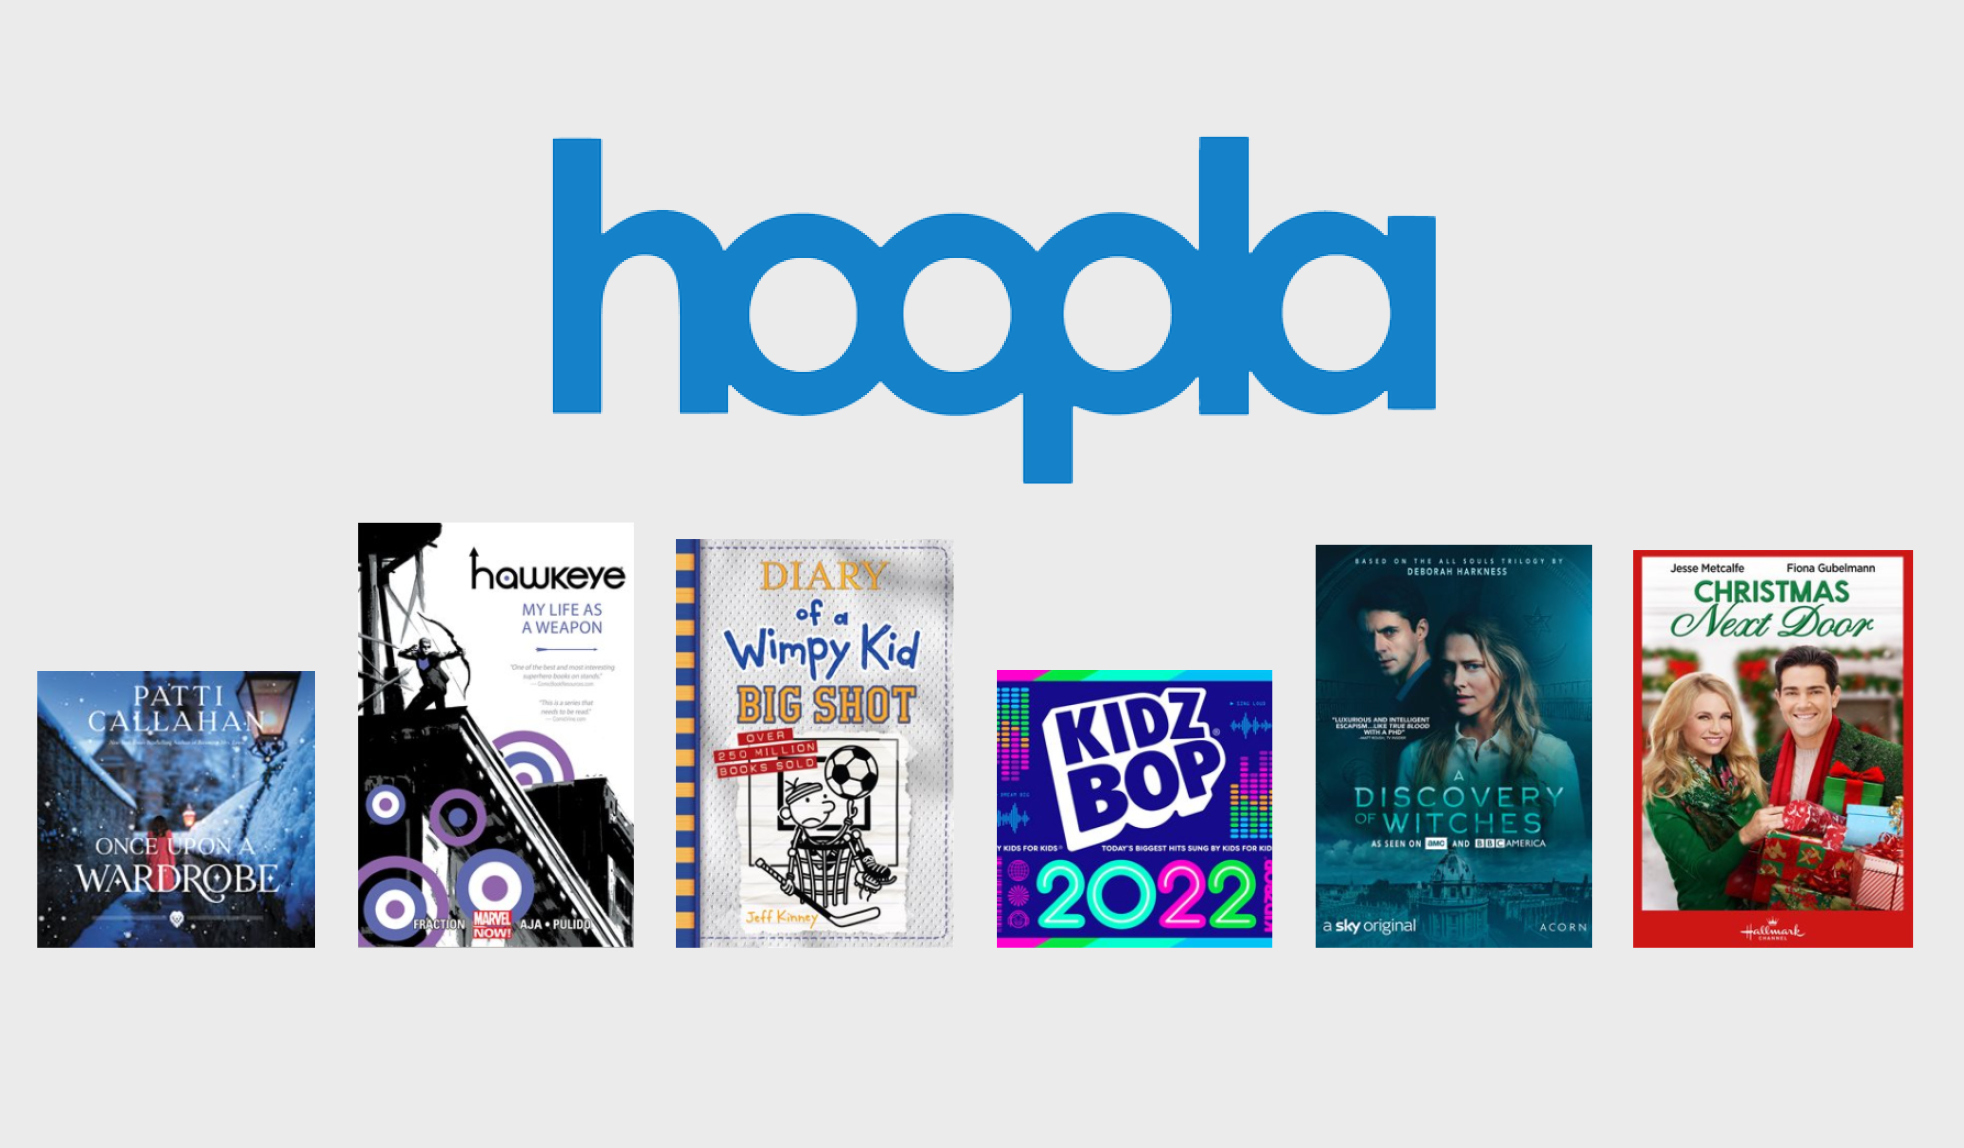 Hoopla is a digital media streaming platform available for free with your library card.